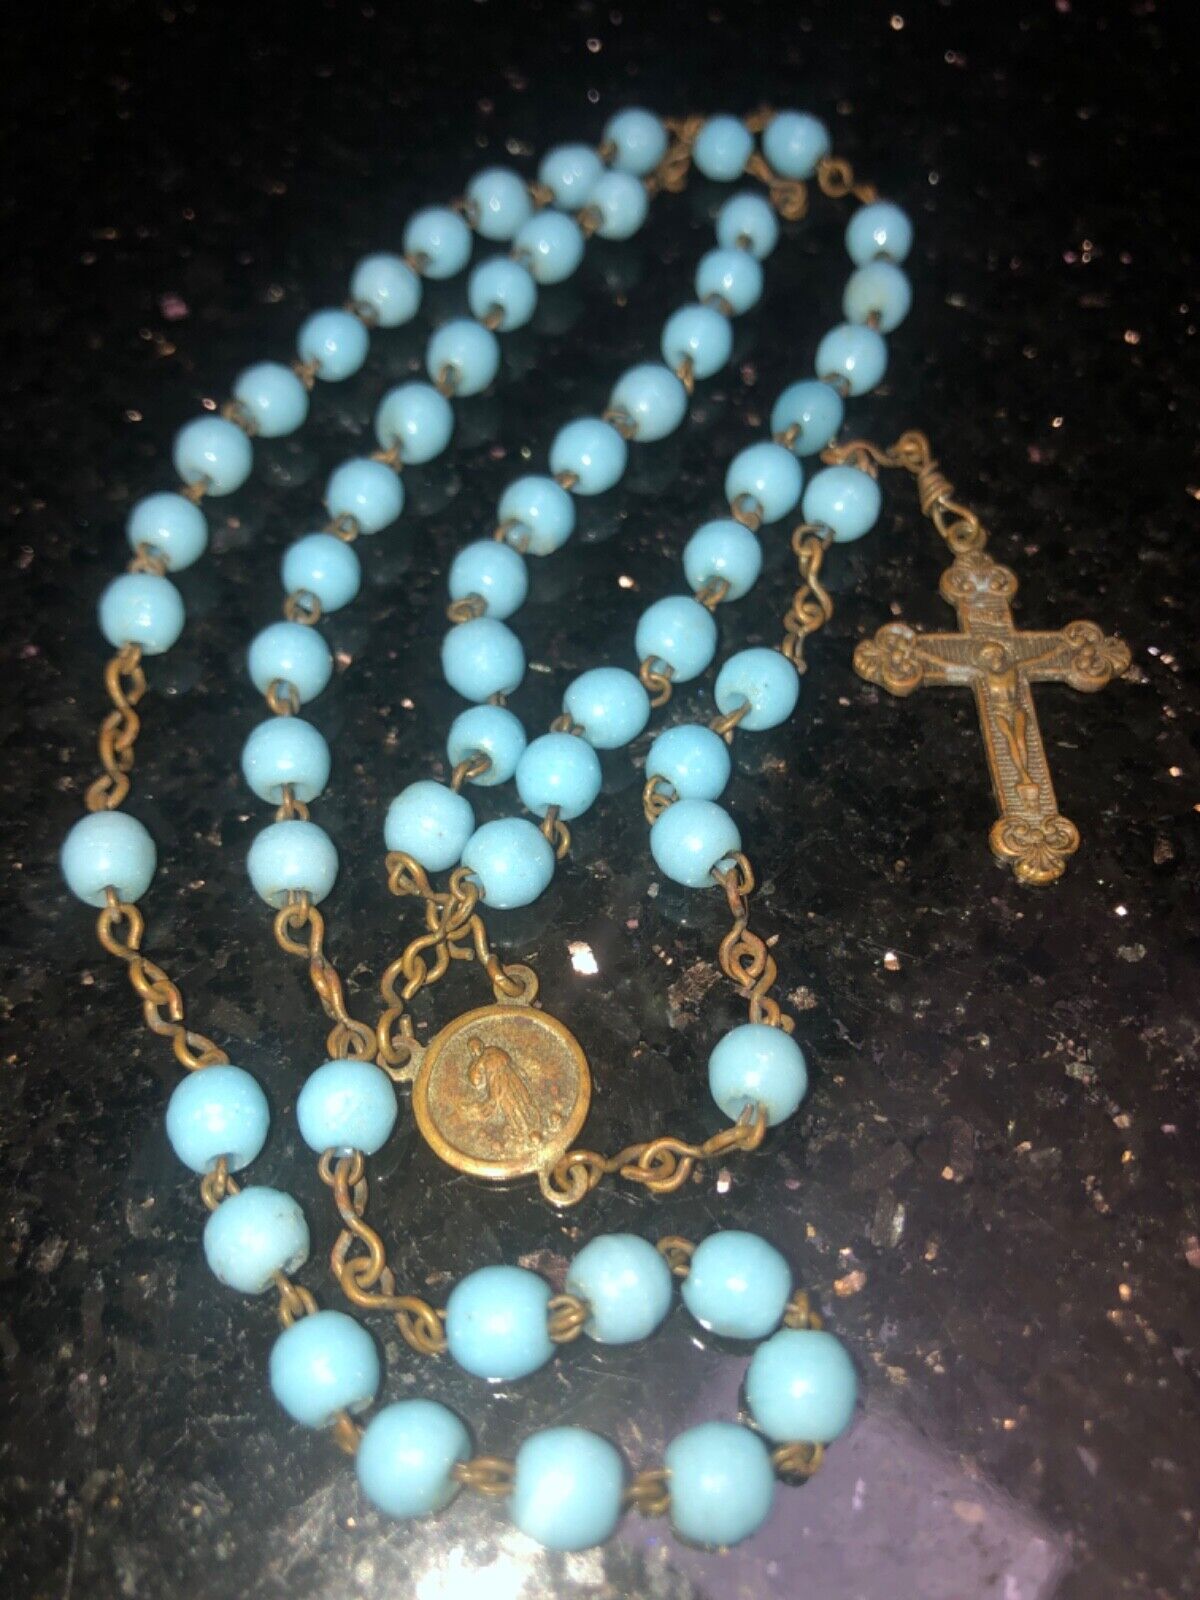 Old Vintage Antique Italian Rosary 59 blue glass beads,